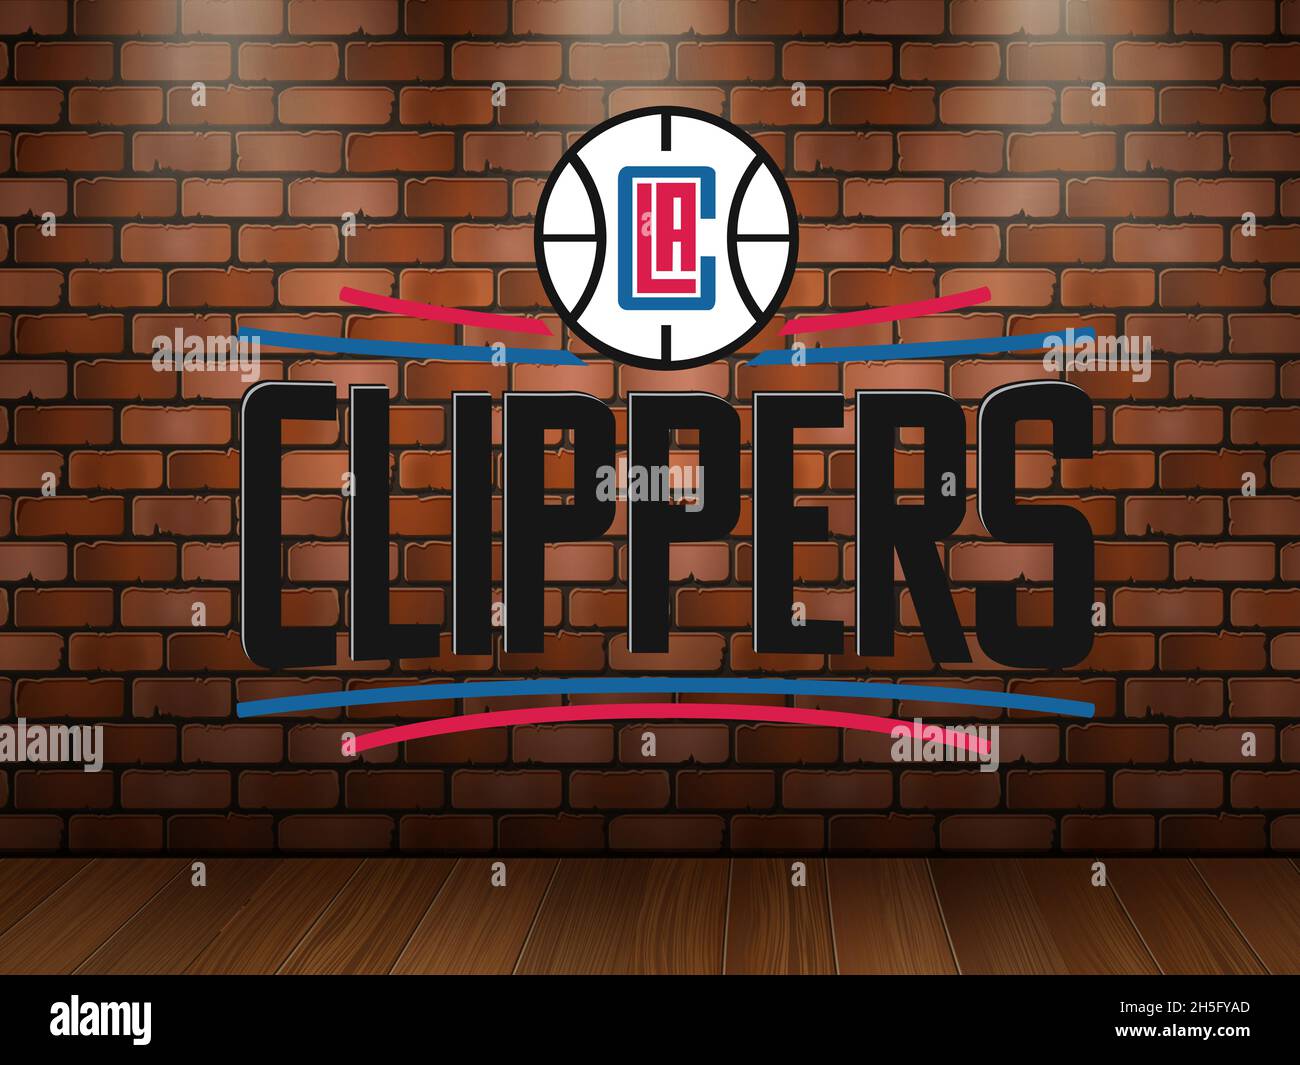 Wappen Los Angeles Clippers, Los Angeles, Sie treten in der National Basketball Federation (NBA) an Stockfoto